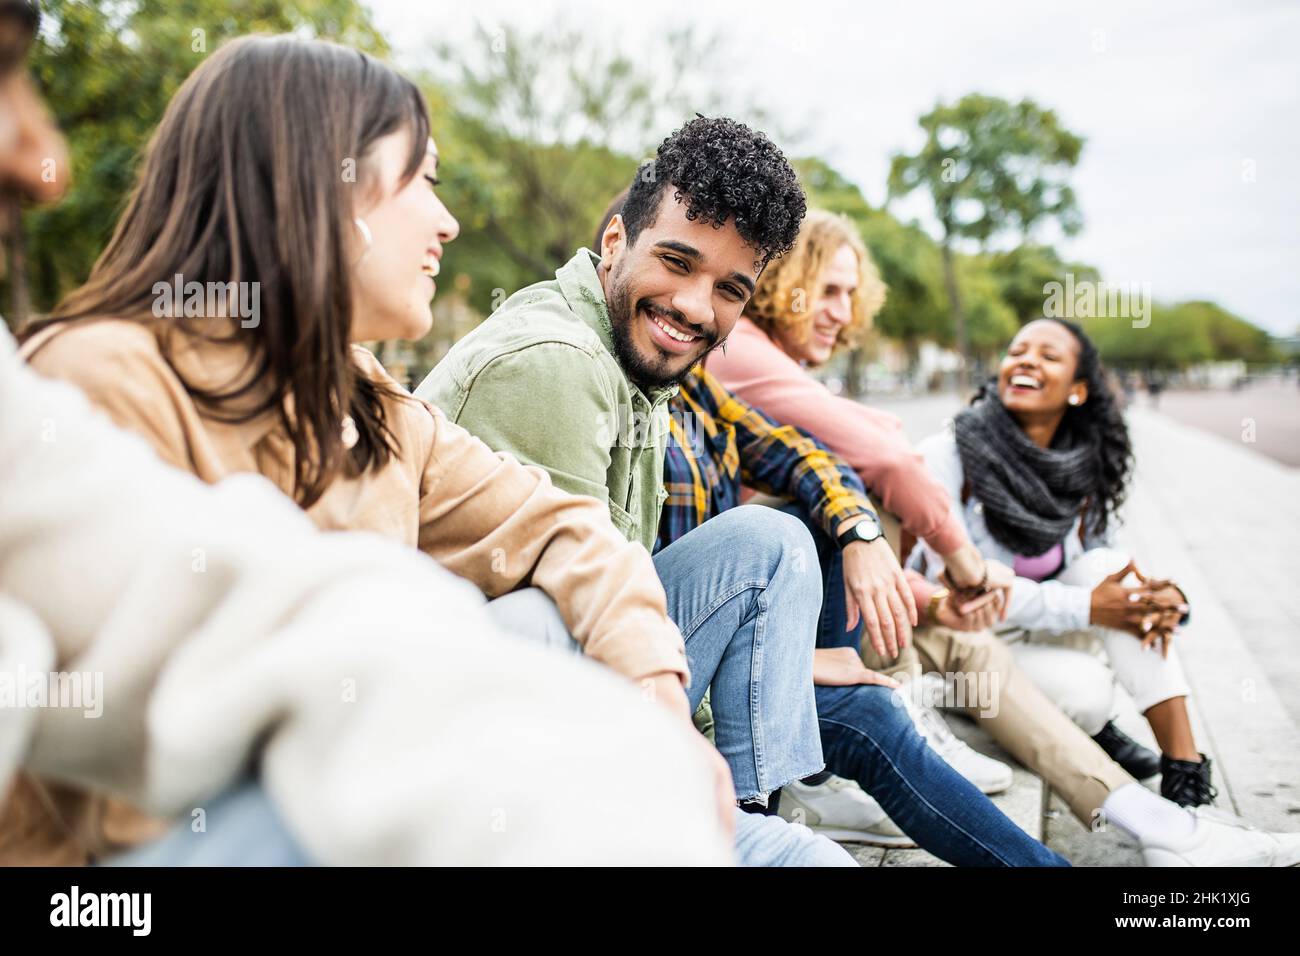 Diverse group of young people laughing and having fun together Stock Photo